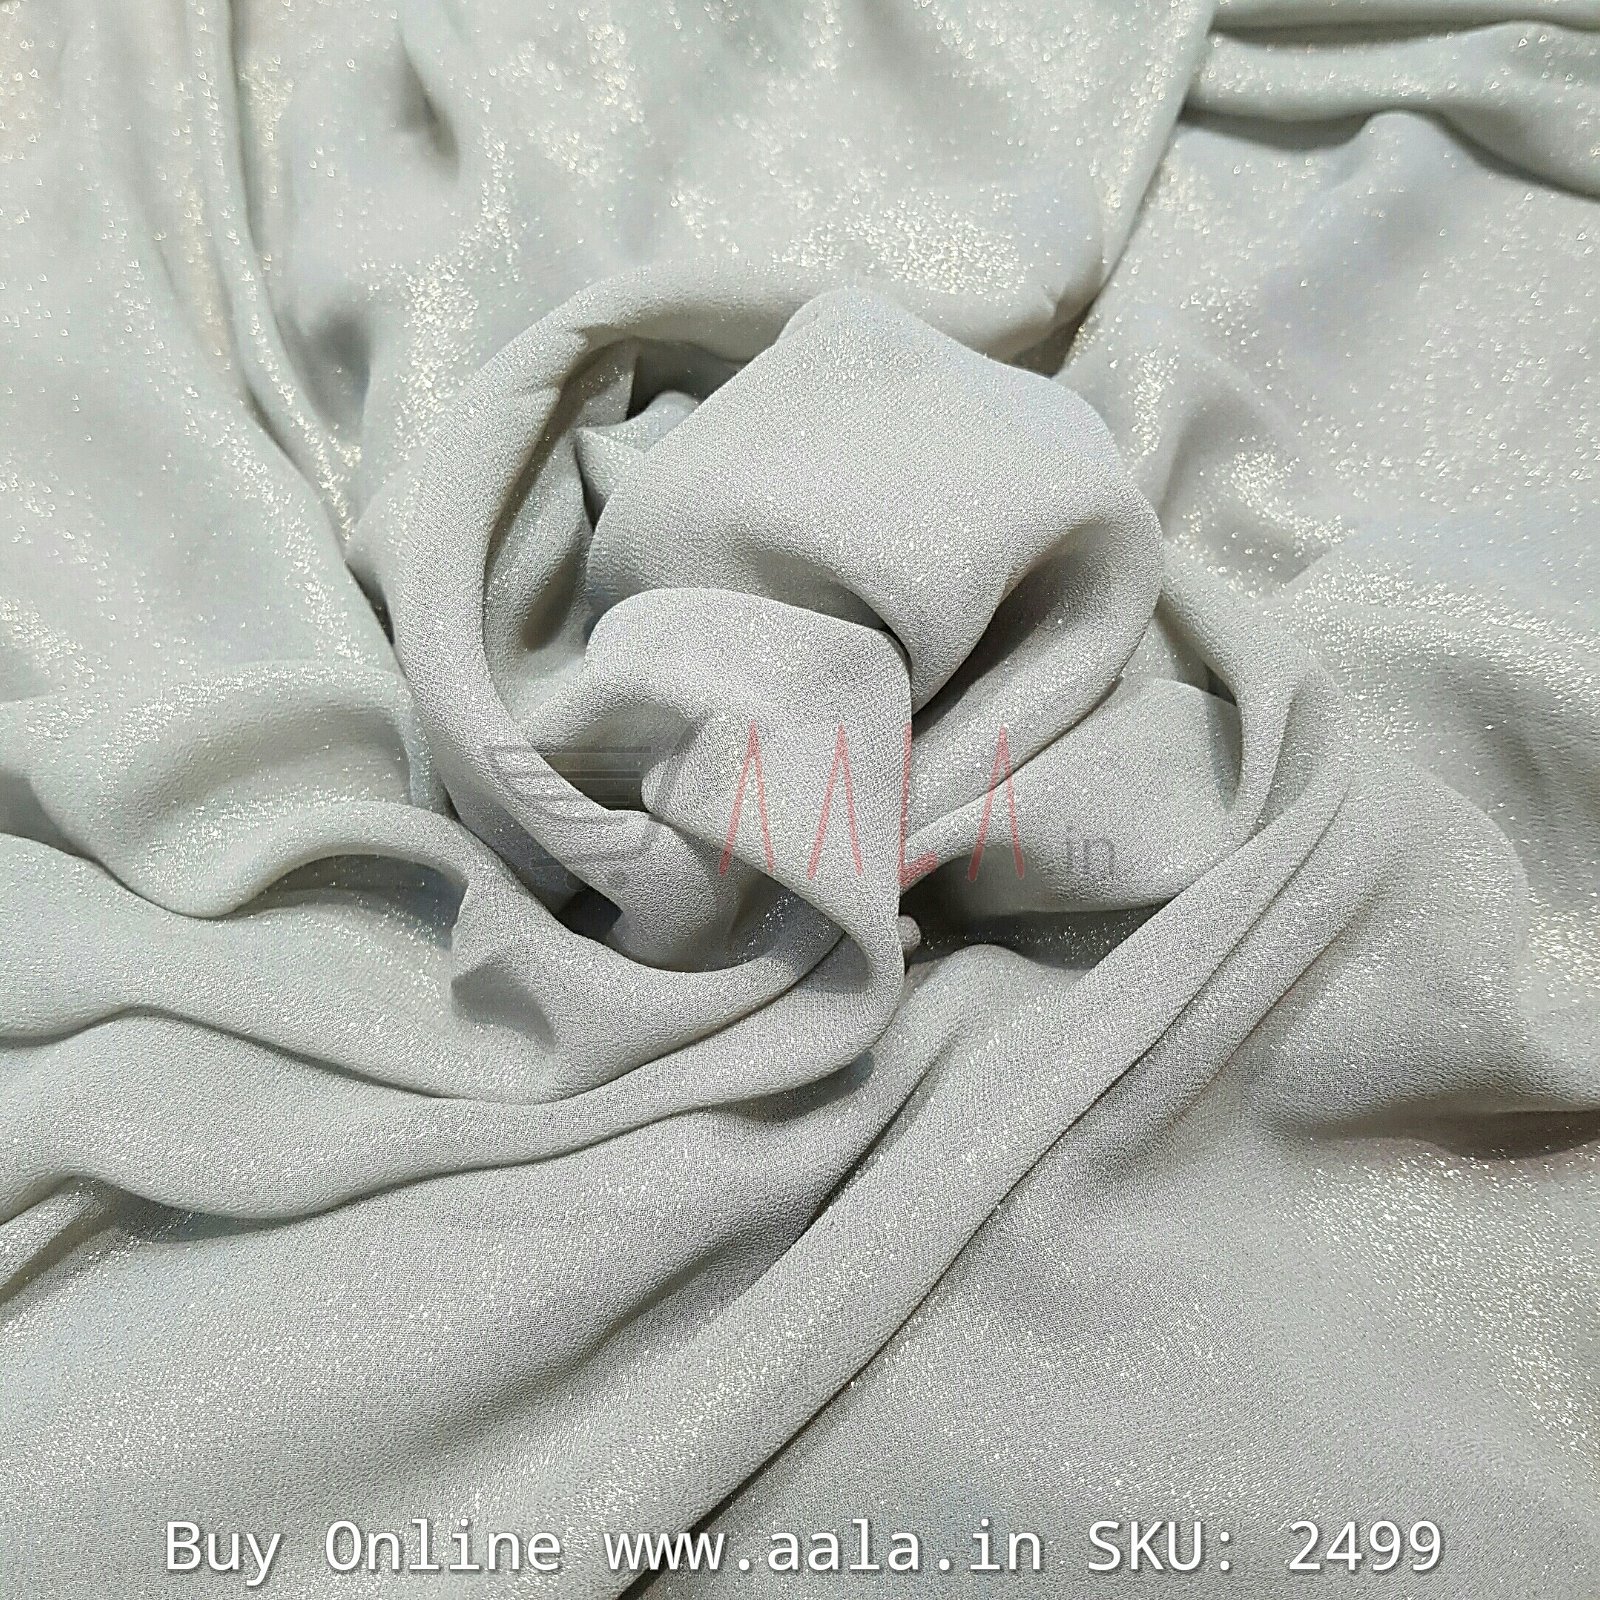 Half Coating Georgette Poly-ester 44 Inches Dyed Per Metre #2499